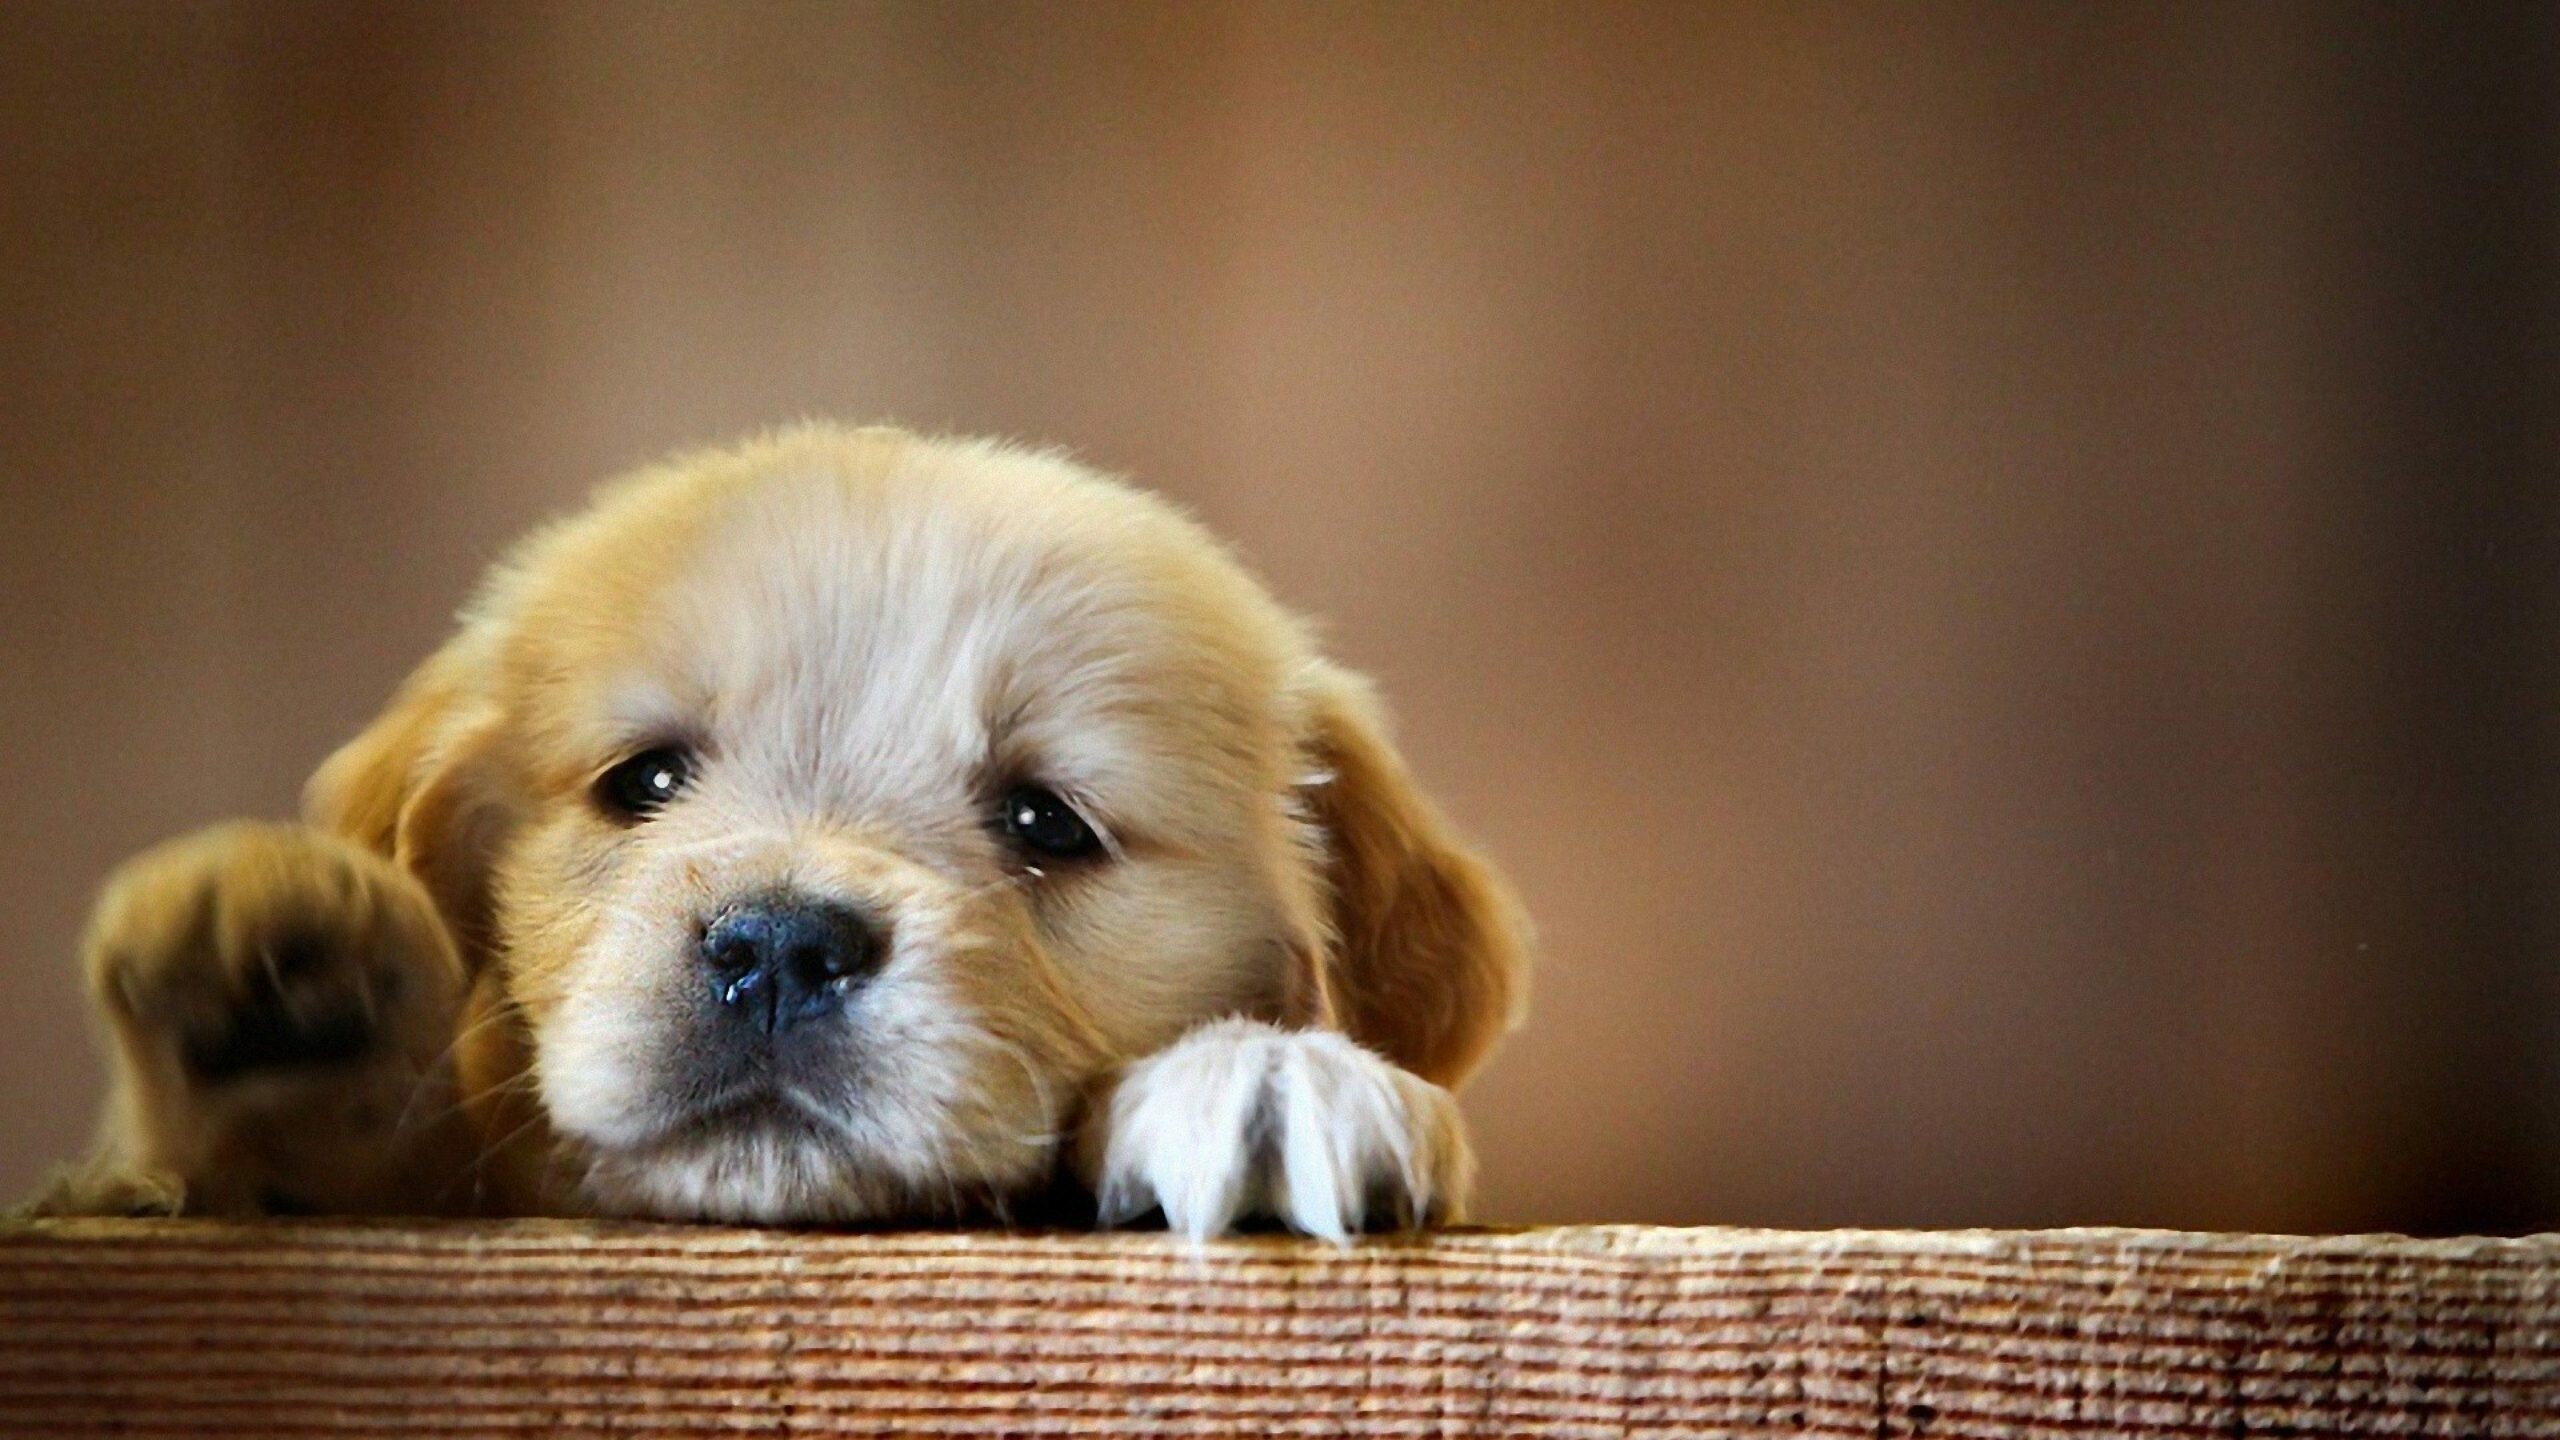 Puppy: Dog, Referred to as "man's best friend. 2560x1440 HD Wallpaper.